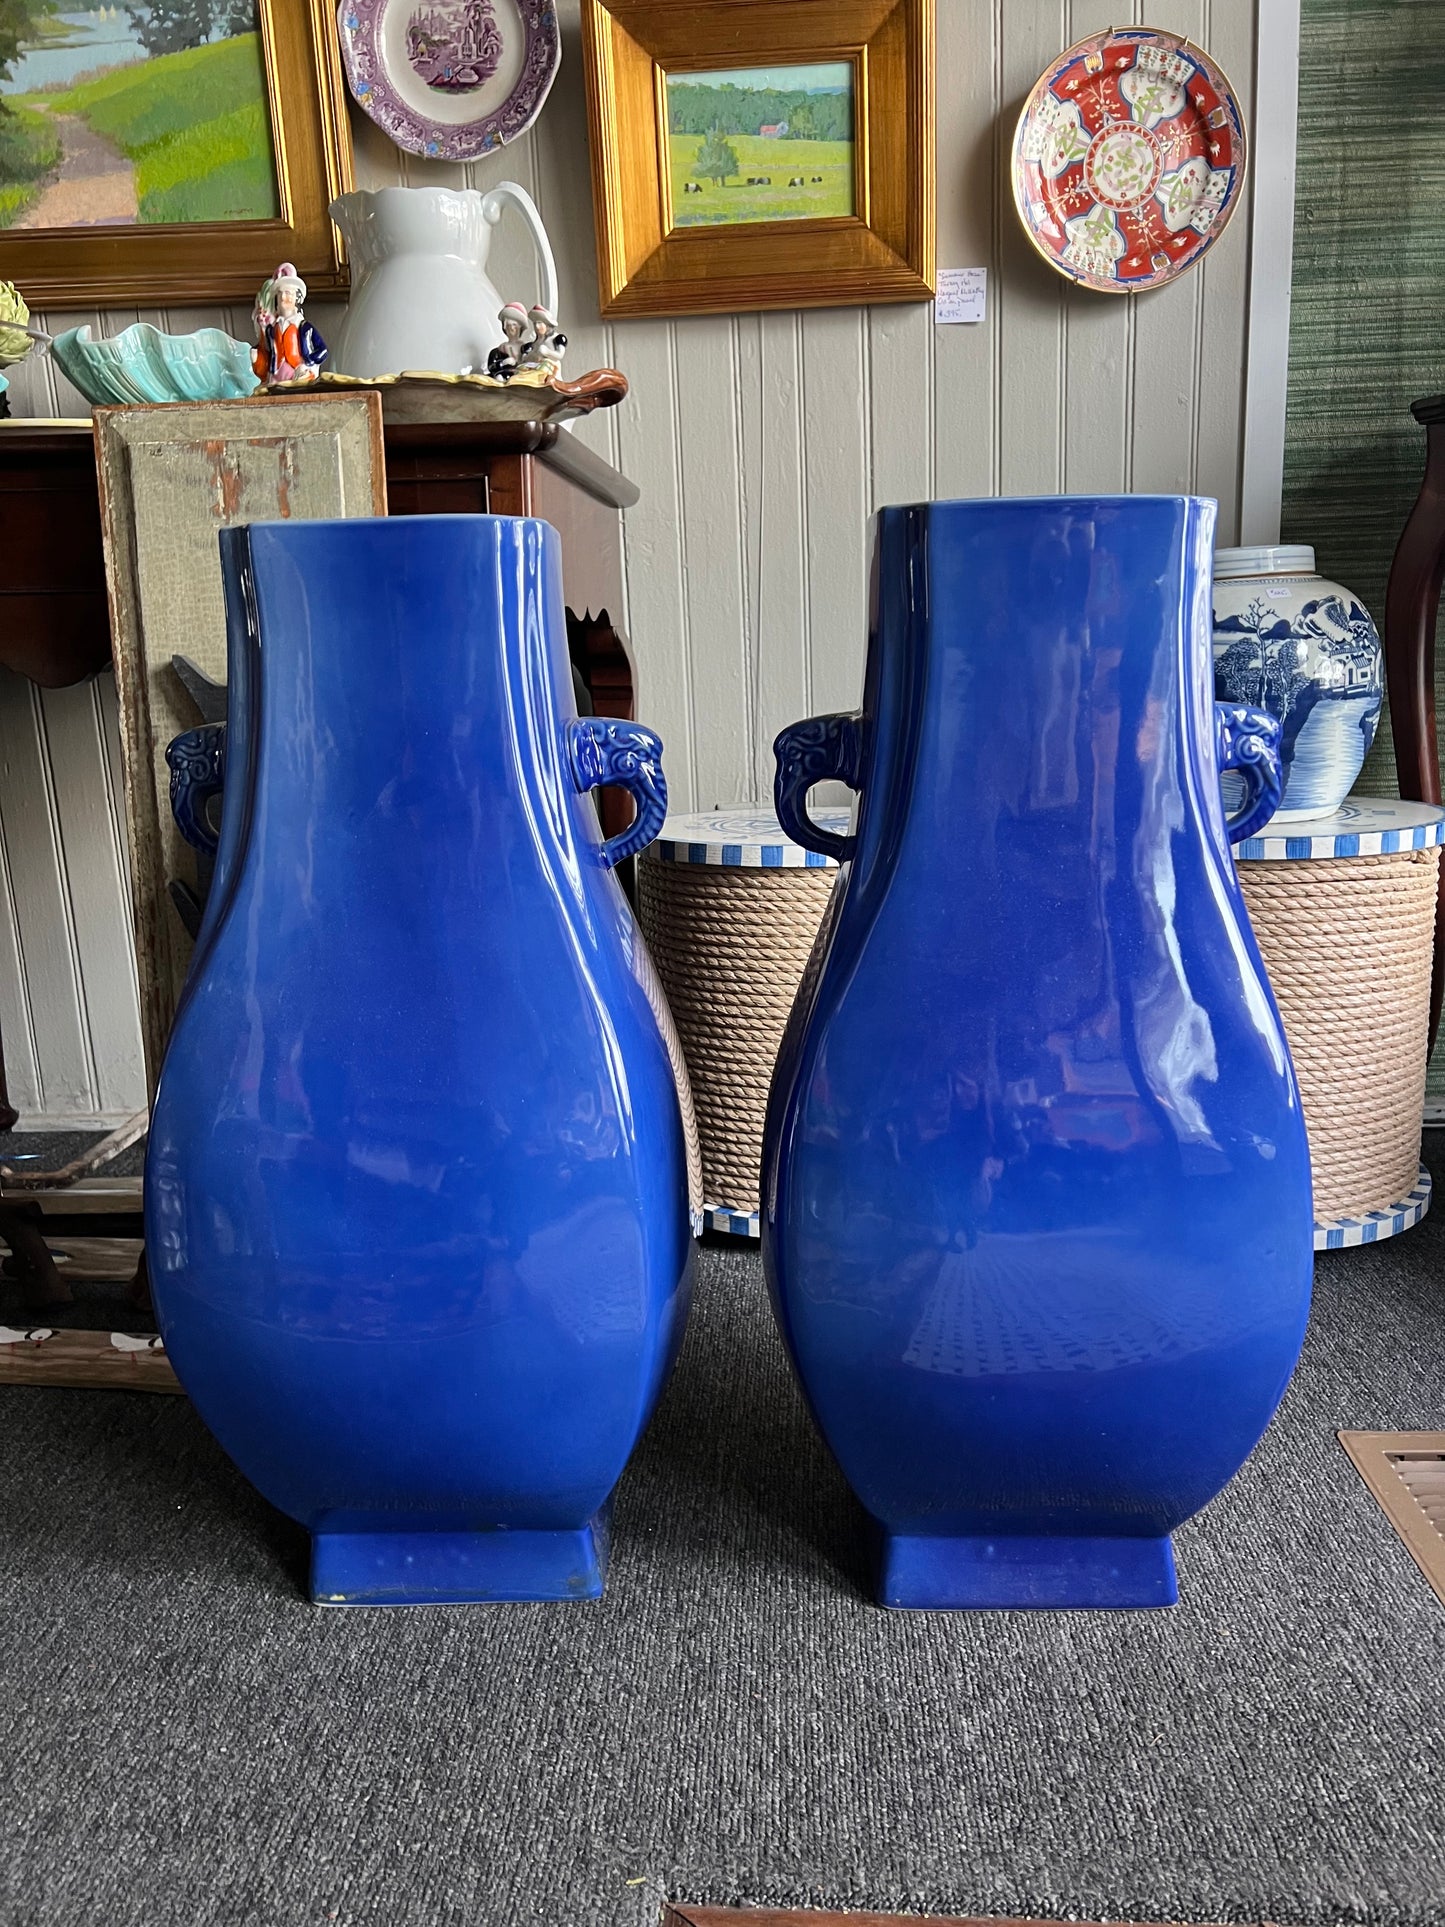 Large Chinese Palace Vases/Umbrella Stands